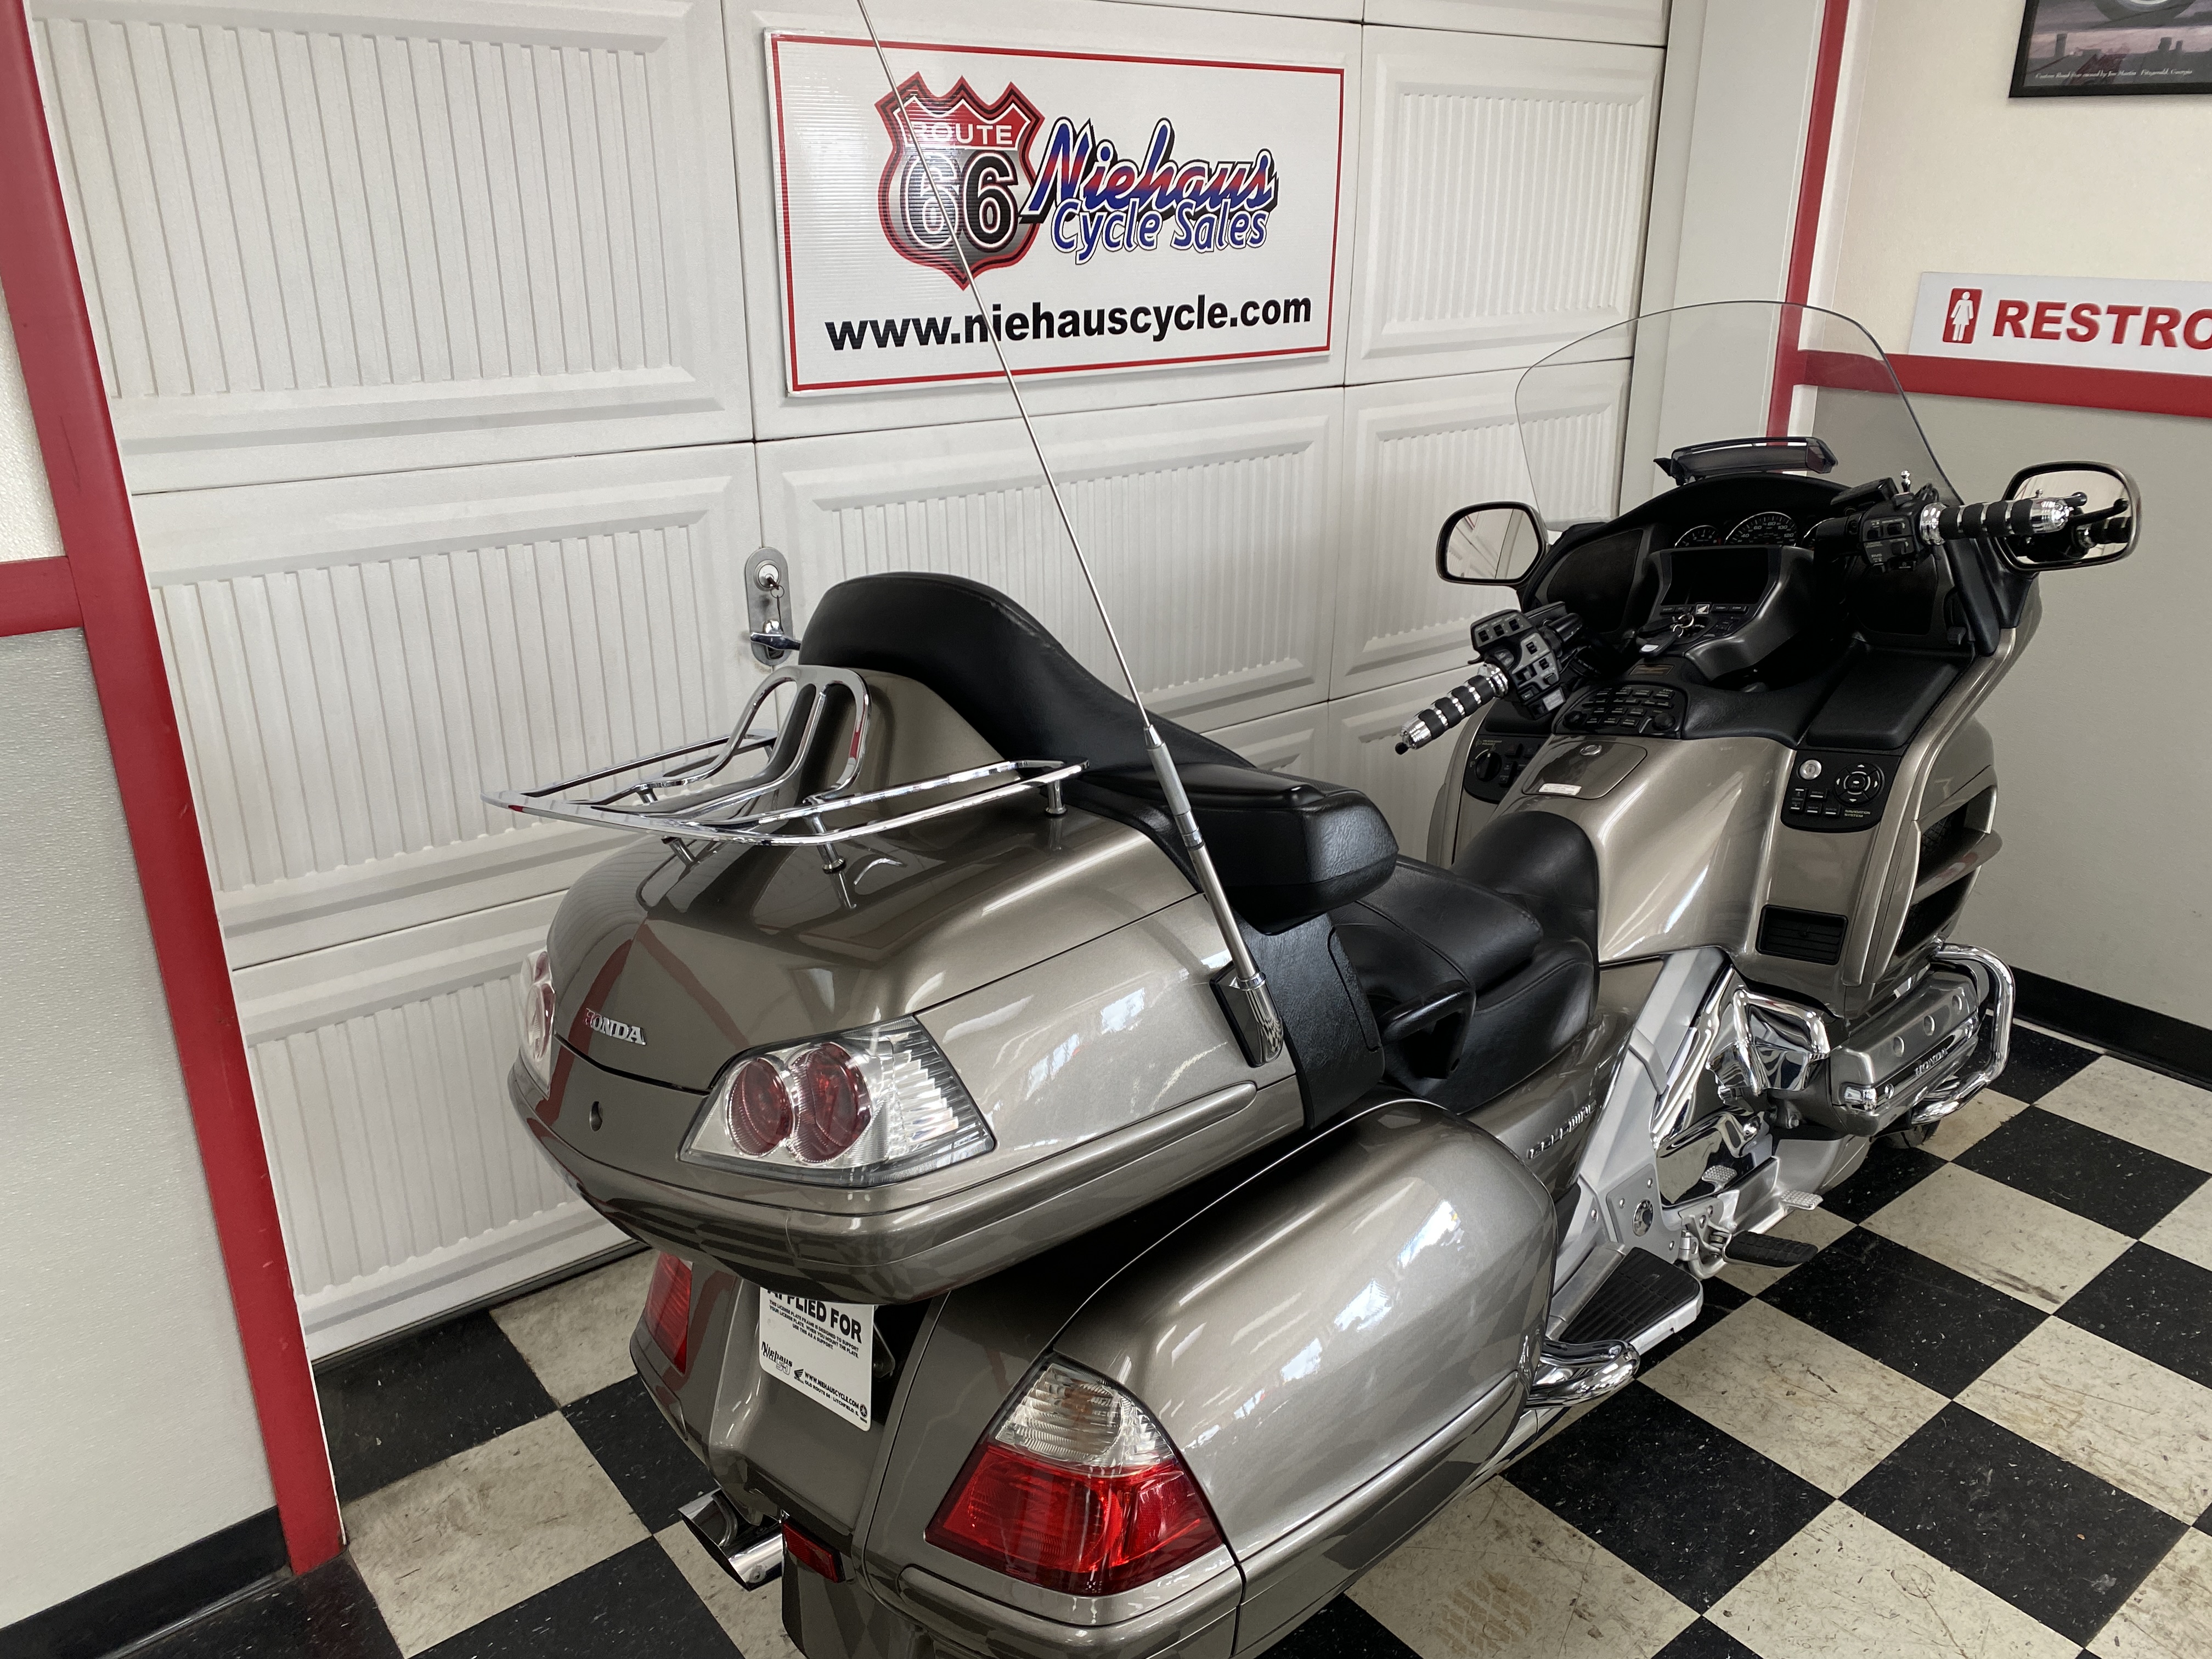 2008 GL1800HPNA GOLD WING ABS GL1800HPNA GOLD WING ABS H03493 - Click for larger photo